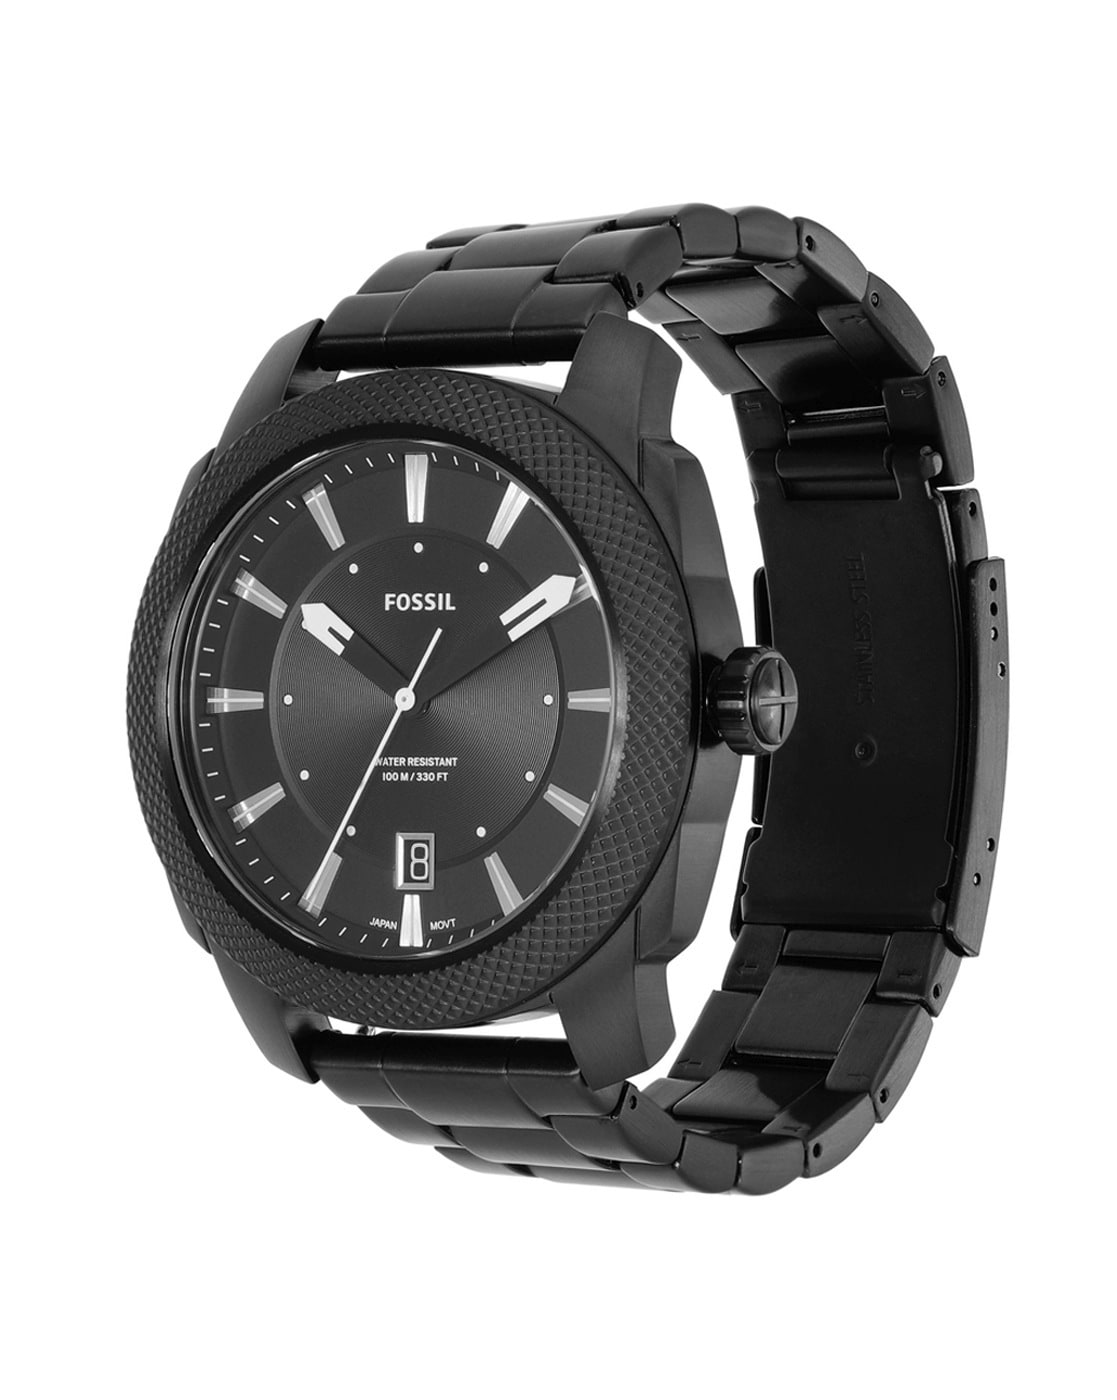 FOSSIL Buy Watches by for Online Black Men